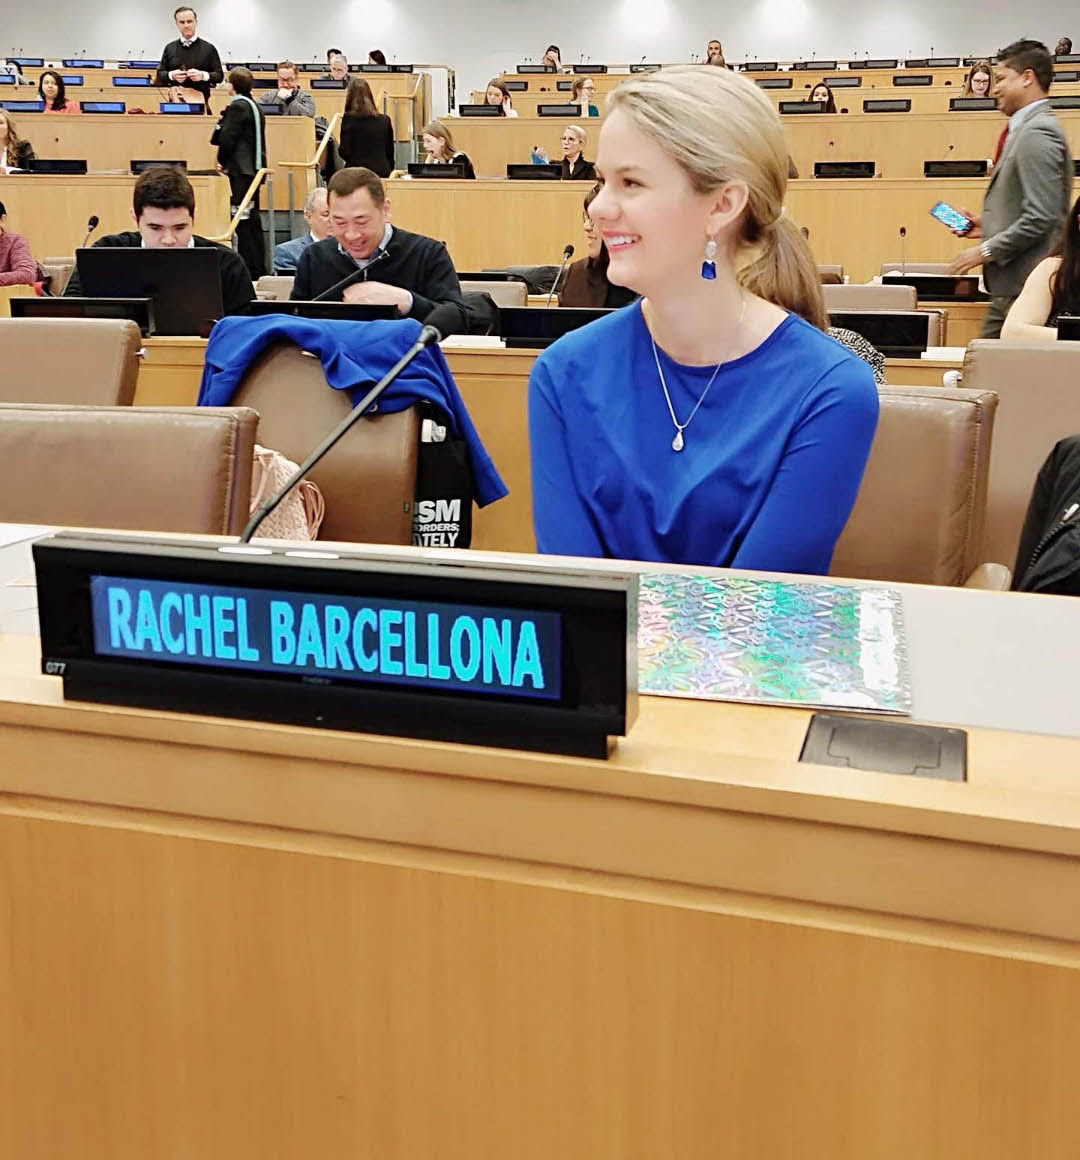 rachel barcellona speaking at united nations